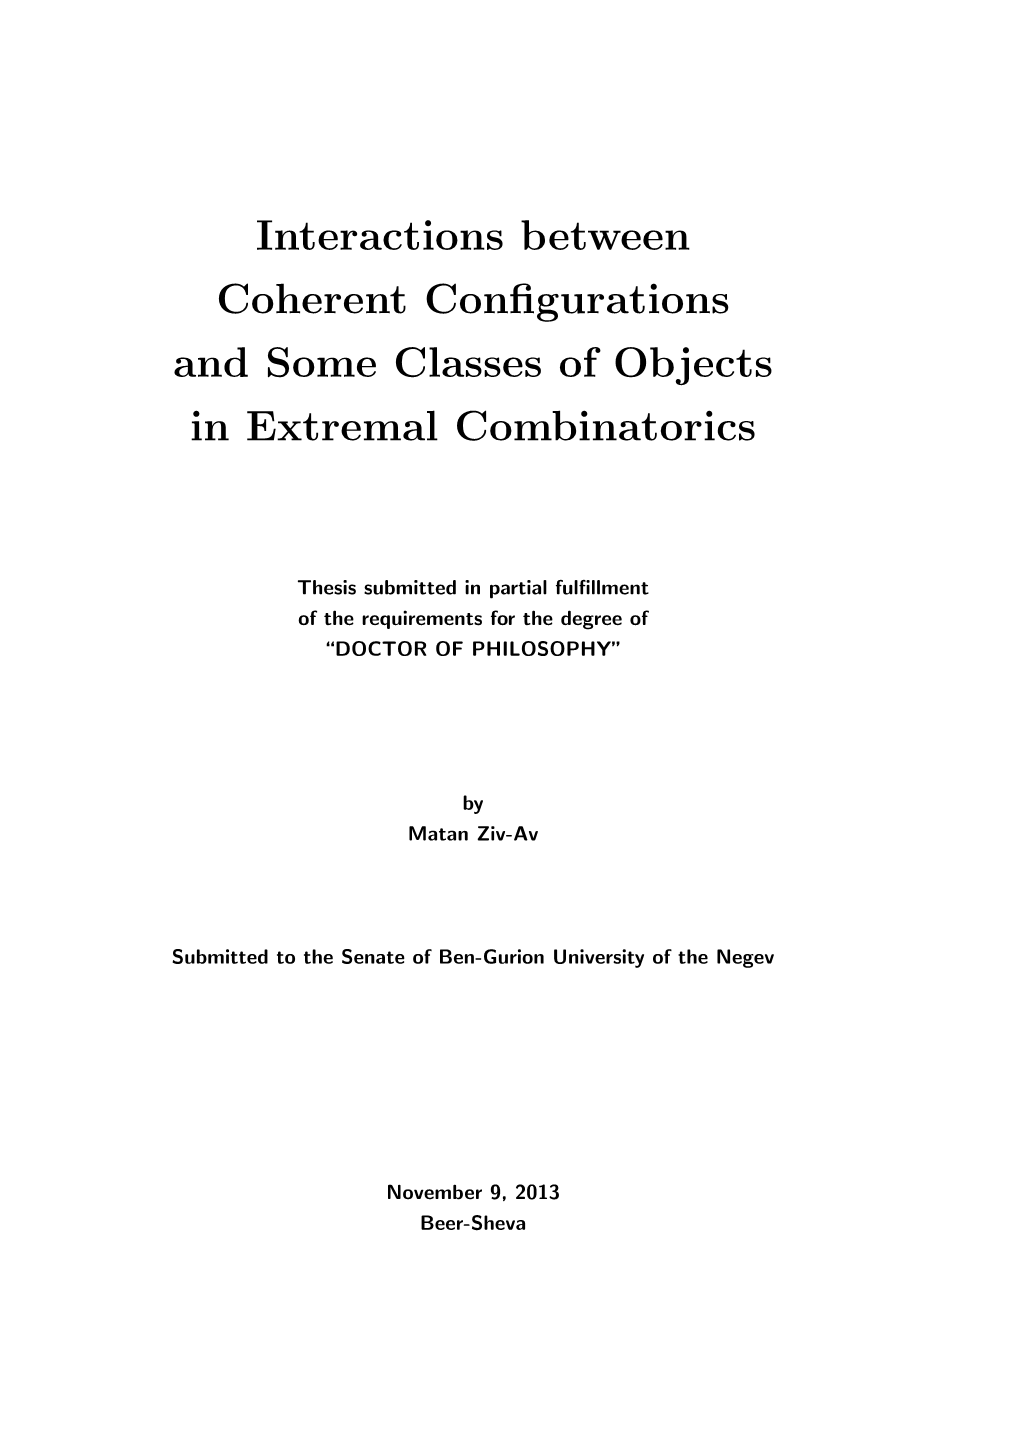 Interactions Between Coherent Configurations and Some Classes